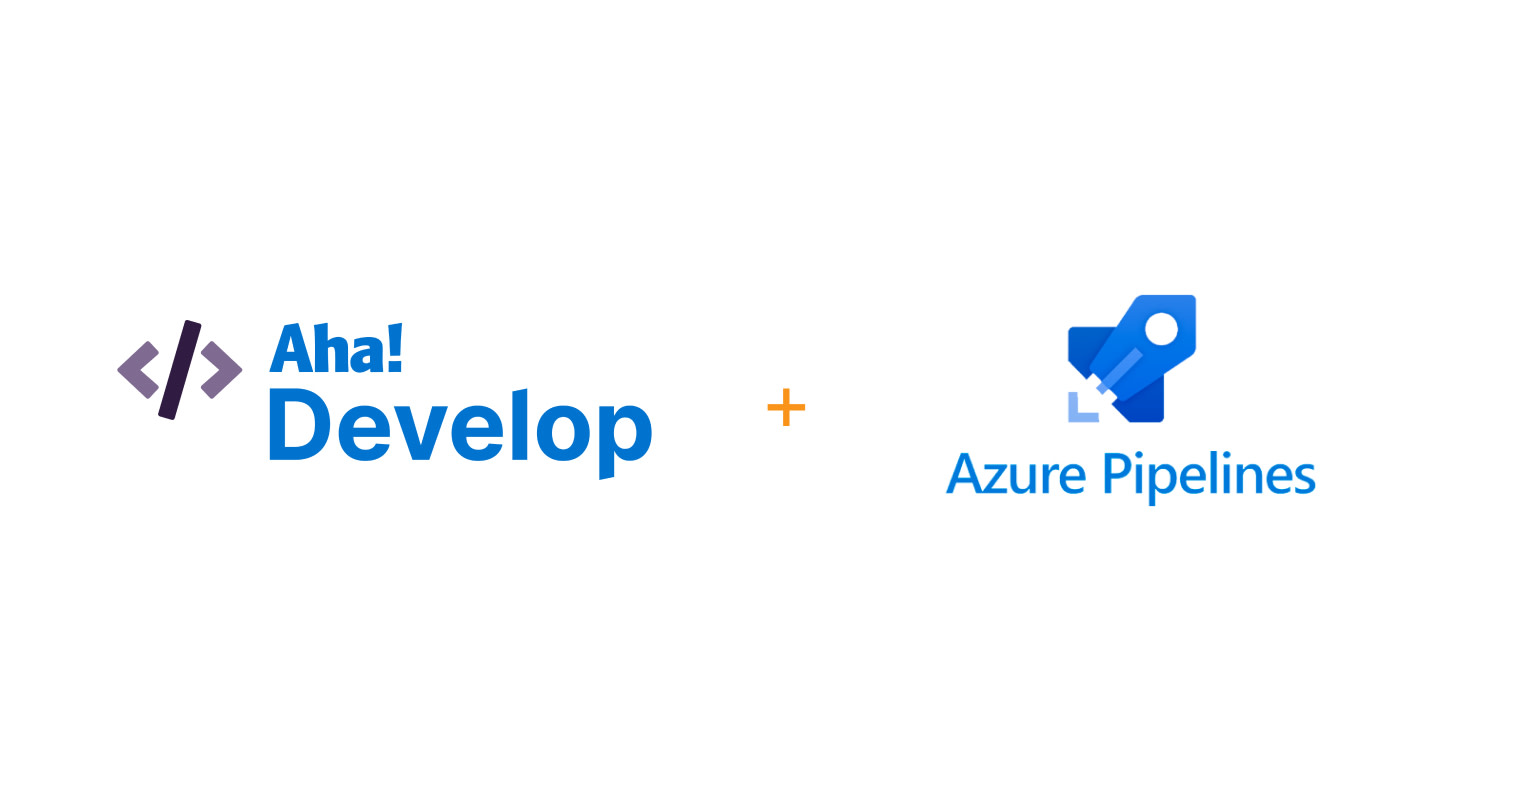 Connect Aha! Develop with Azure Pipelines to track build status directly on your user story card.